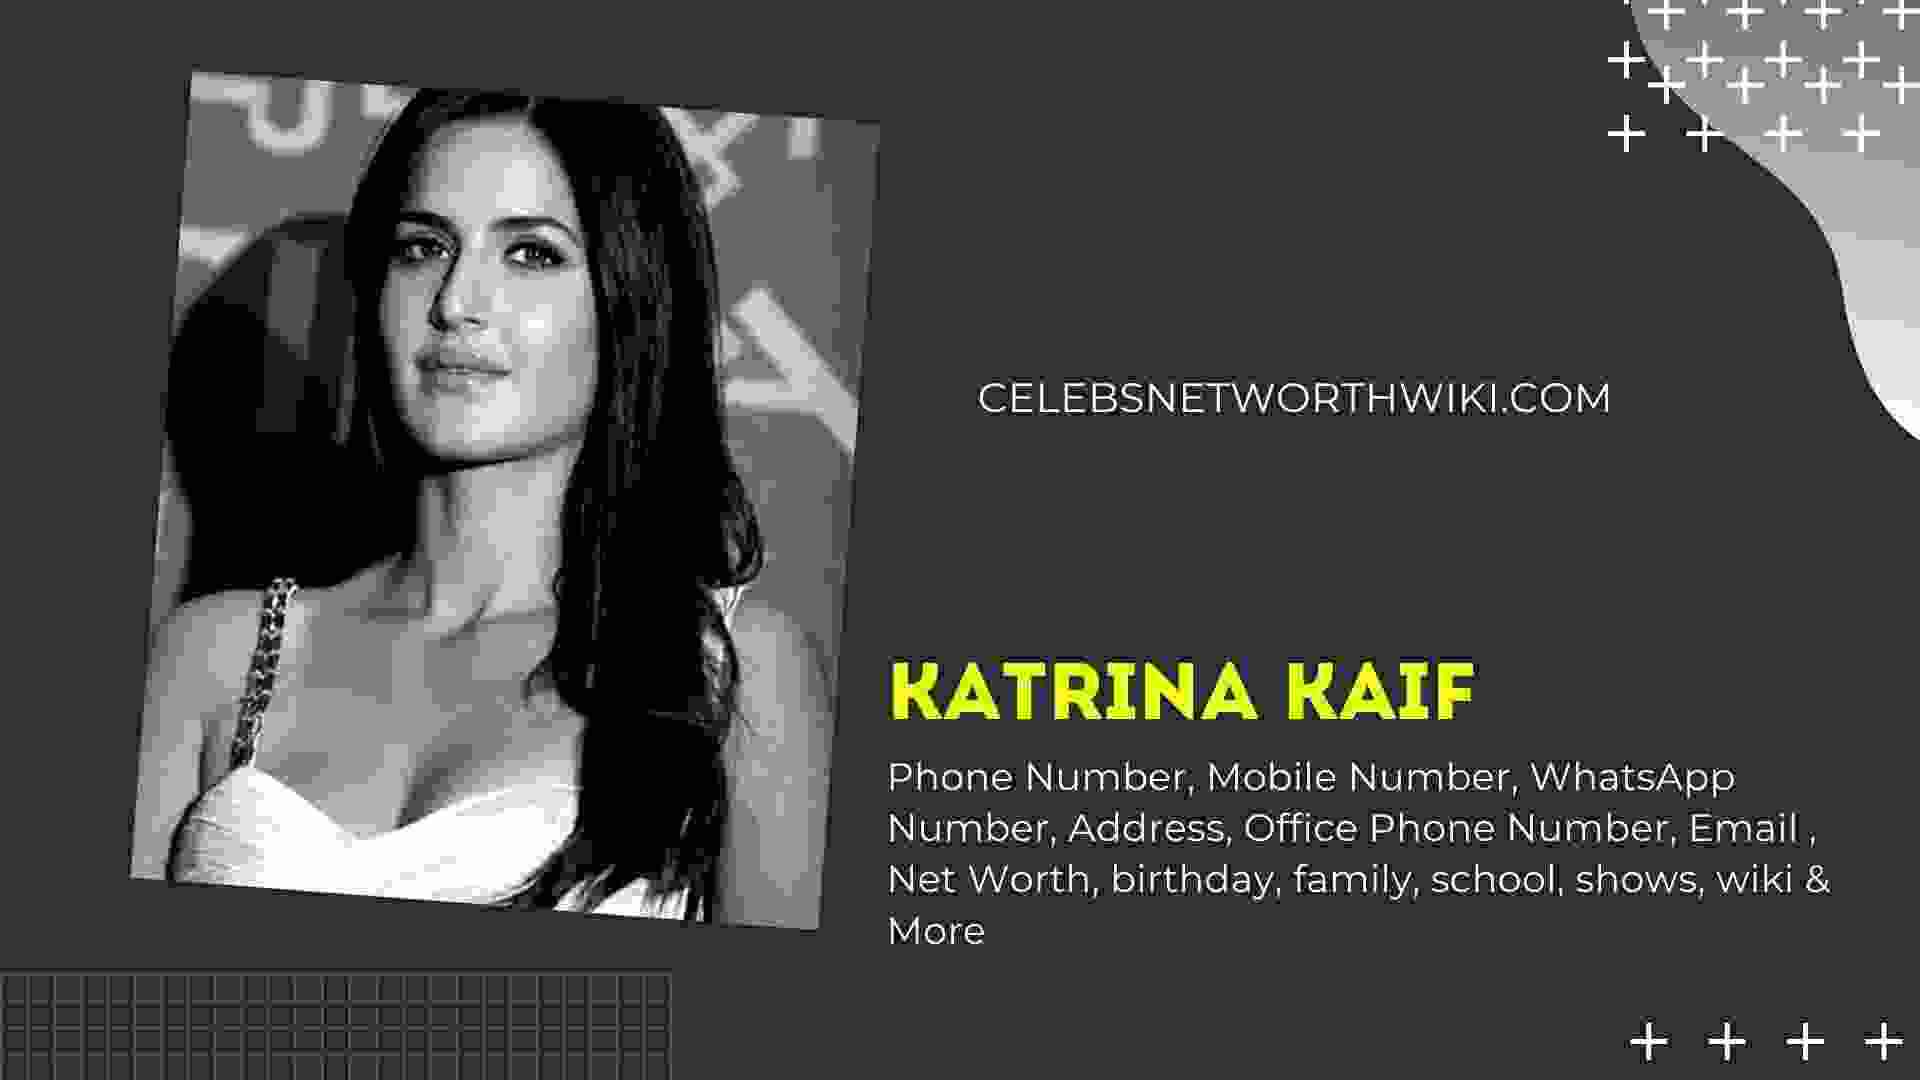 Katrina Kaif Phone Number Whatsapp Number Contact Number Office Phone Number Celebs Networth Wiki International numbers in iphone, katrina kaif mobile number bollywood actress, numbers by name, internet call free download software, free numerology report online, motorbike number plates size, horoscopes yahoo. katrina kaif phone number whatsapp